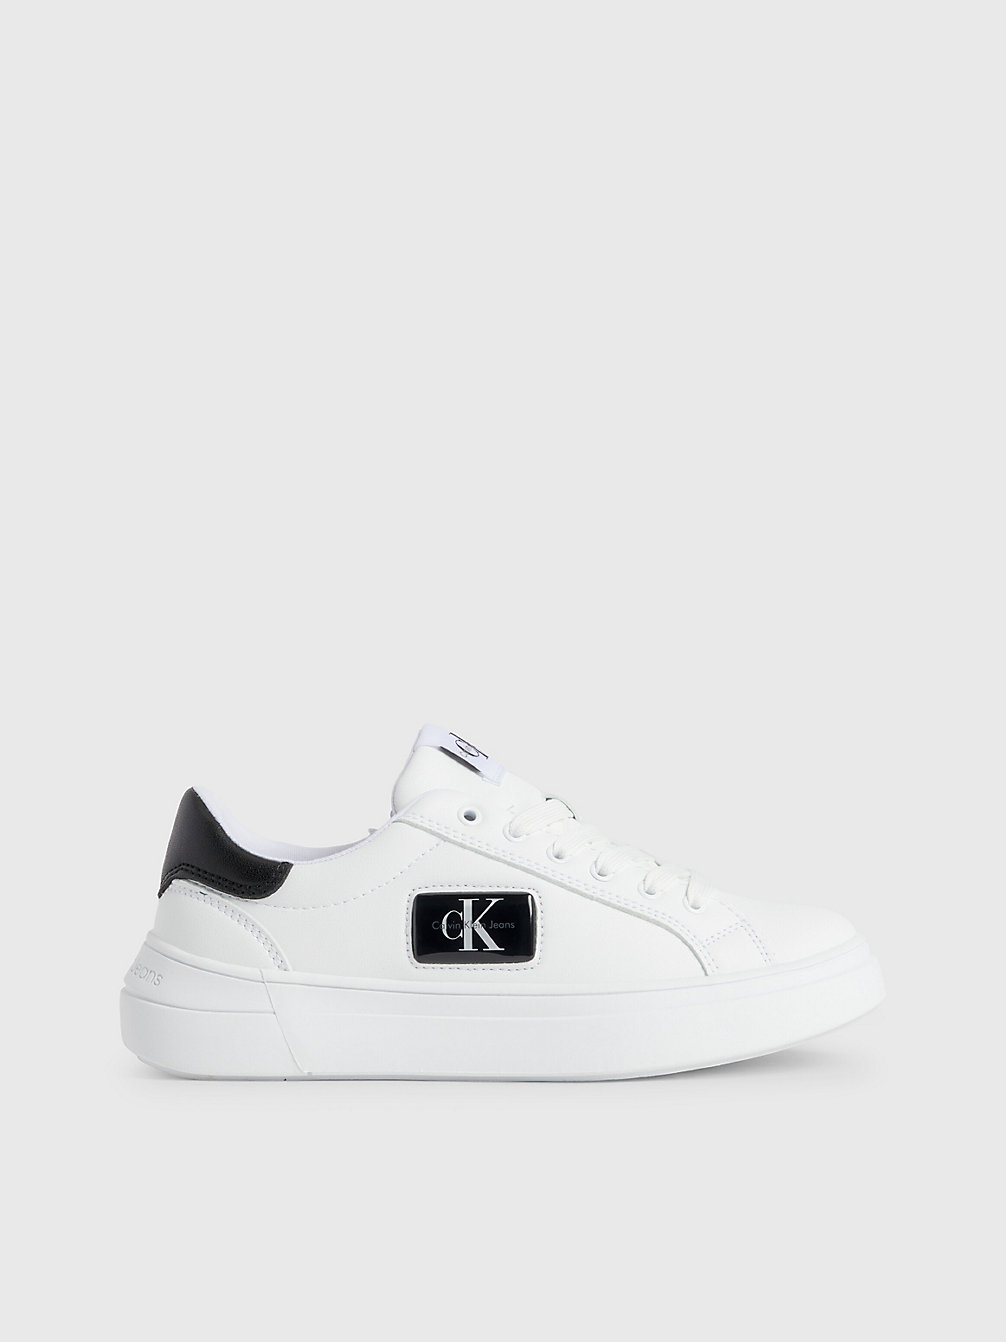 WHITE/BLACK Kids Recycled Trainers undefined kids unisex Calvin Klein